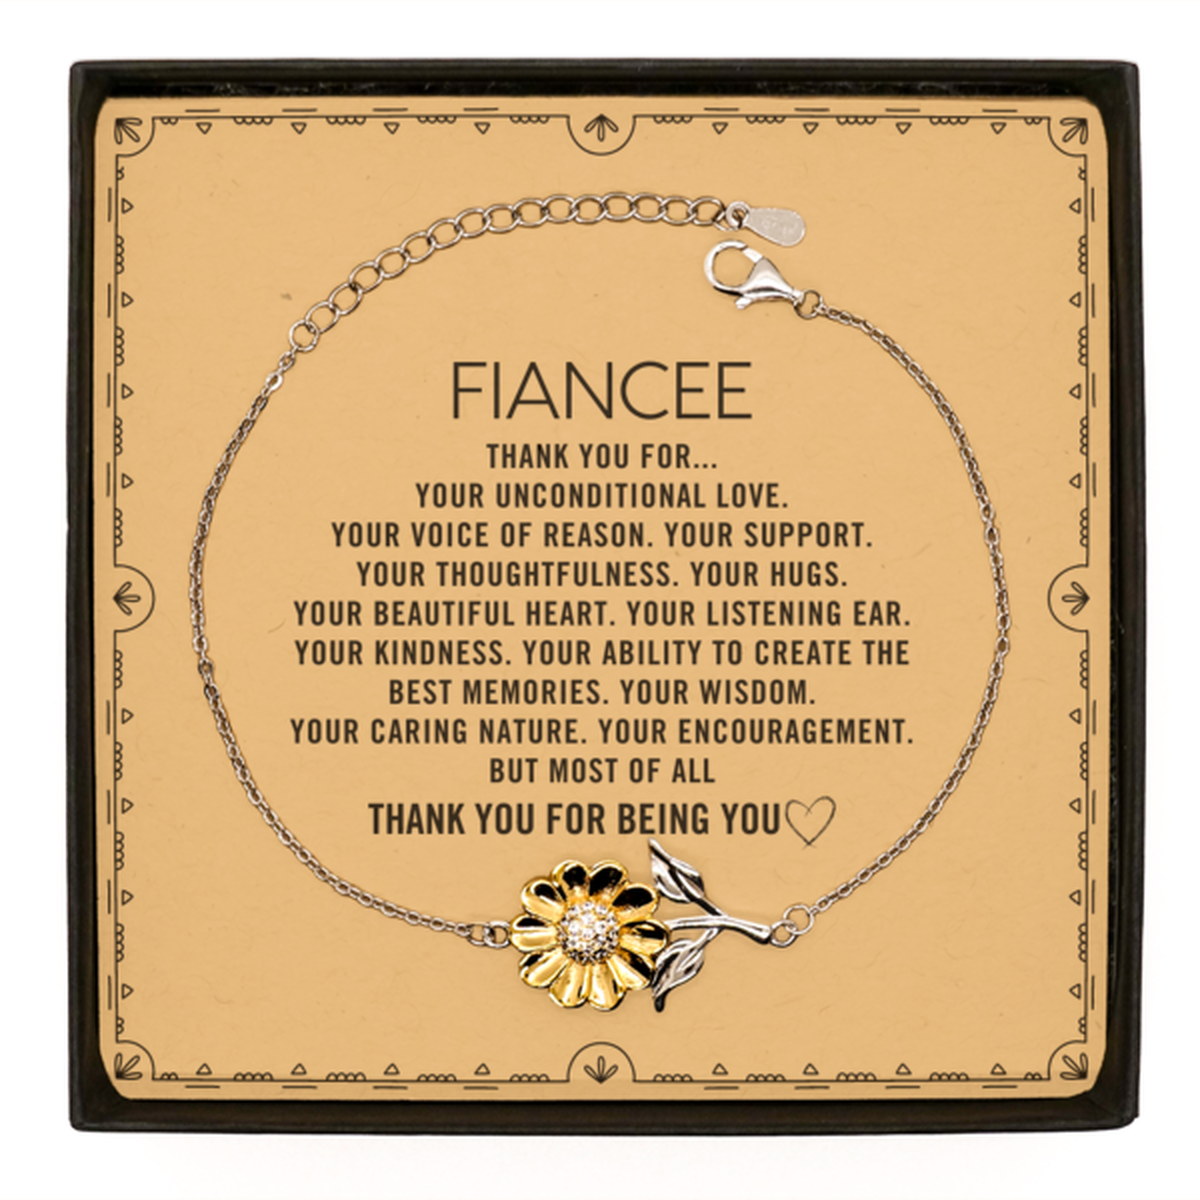 Fiancee Sunflower Bracelet Custom, Message Card Gifts For Fiancee Christmas Graduation Birthday Gifts for Men Women Fiancee Thank you for Your unconditional love